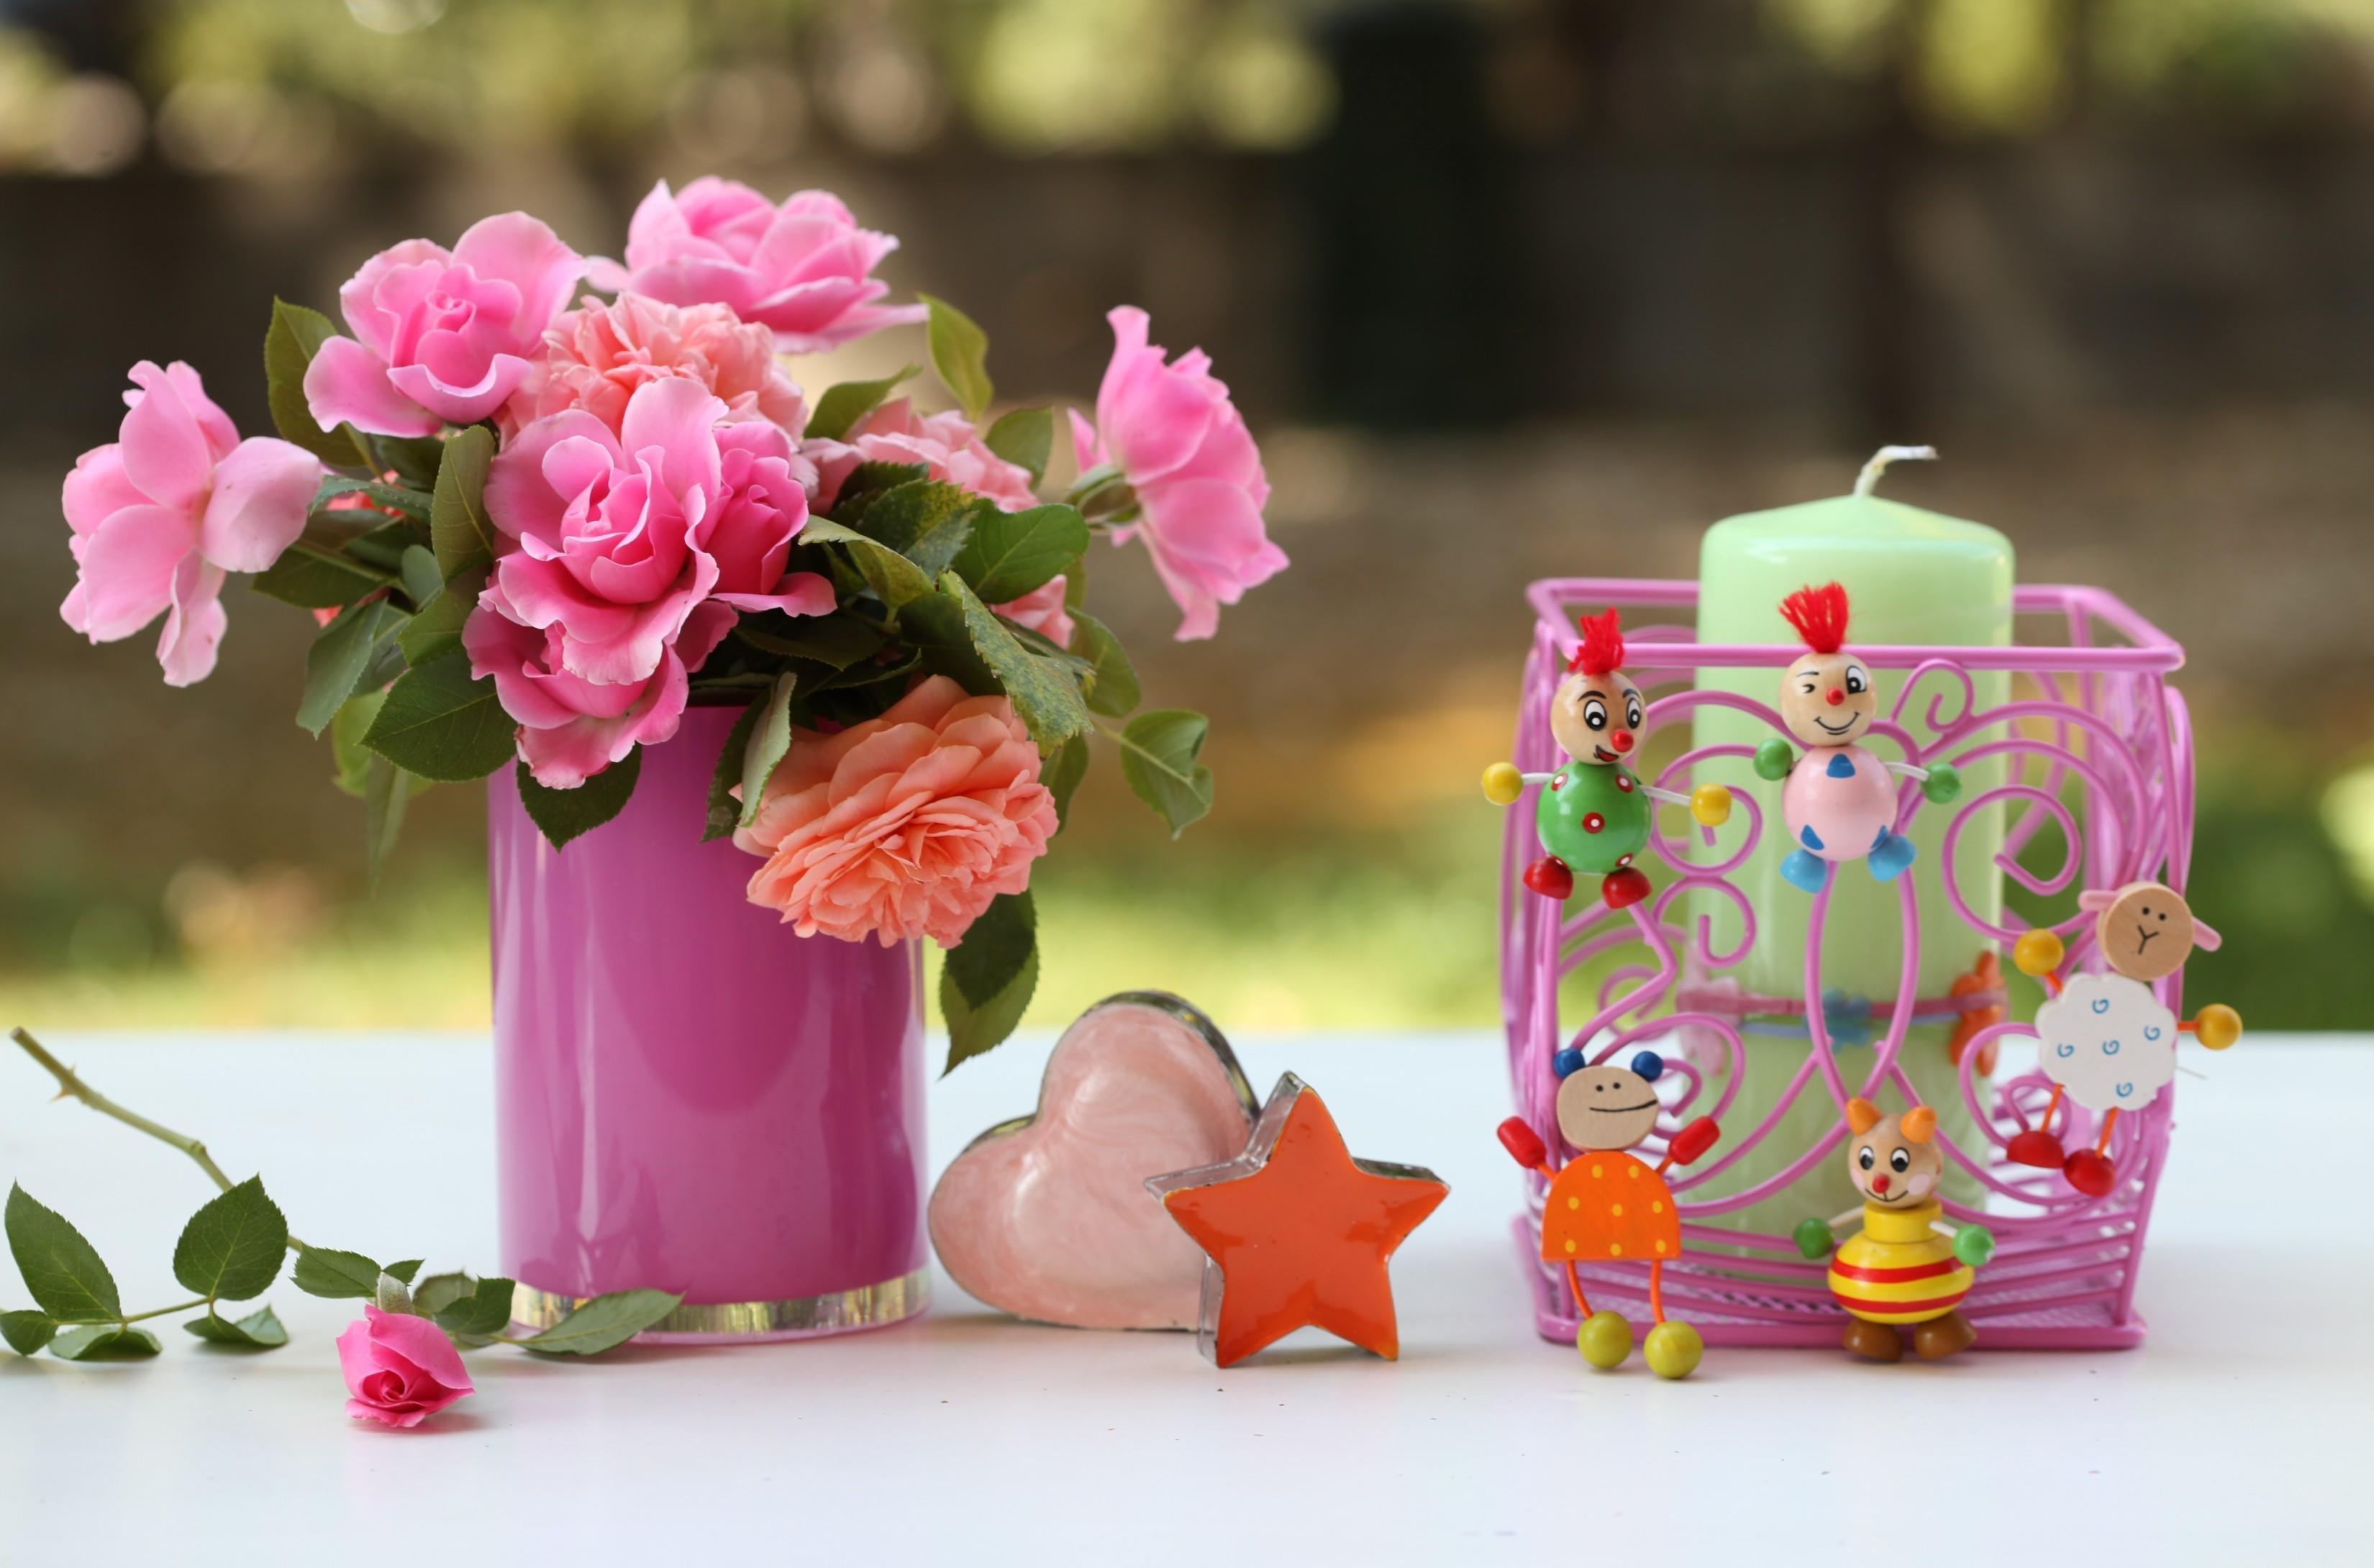 vase, candles, roses, flowers, toys, heart, star